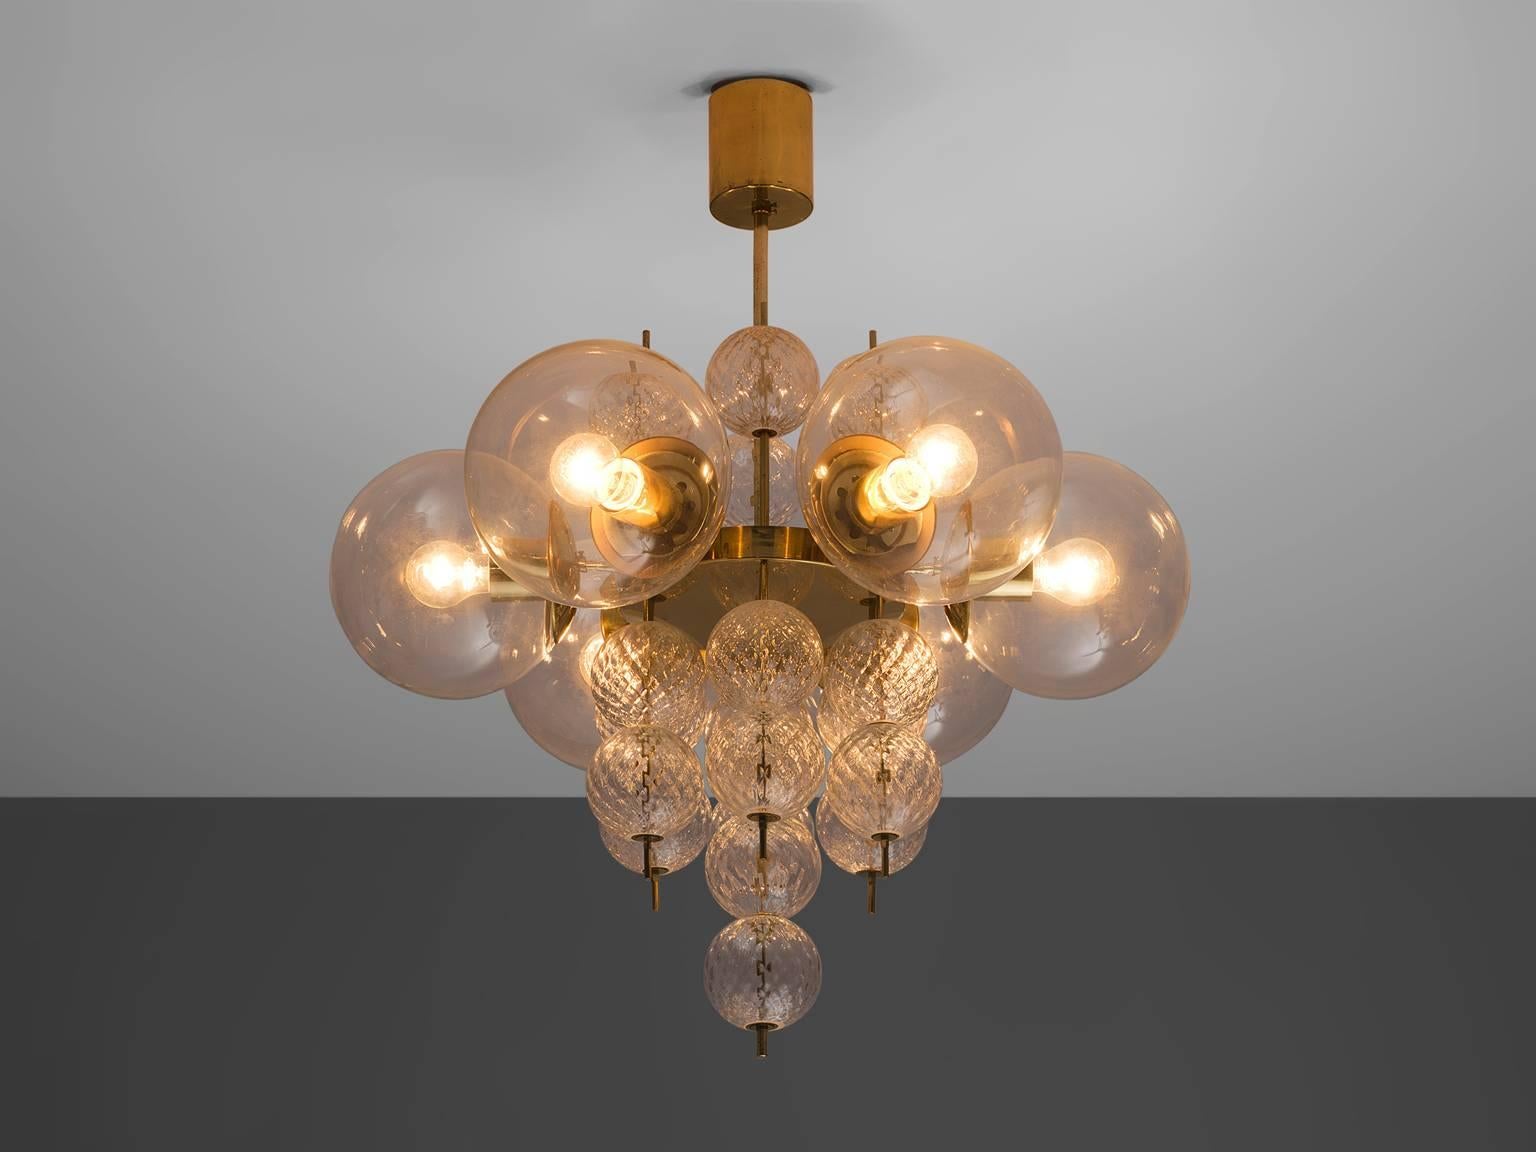 Set of nine brass chandeliers, brass and glass bulbs, Austria, 1960s.

Set of nine chandeliers with brass fixture and art-glass. The chandelier with brass frame consist of six lights, formed in a circle, with glass shades. The pleasant light it